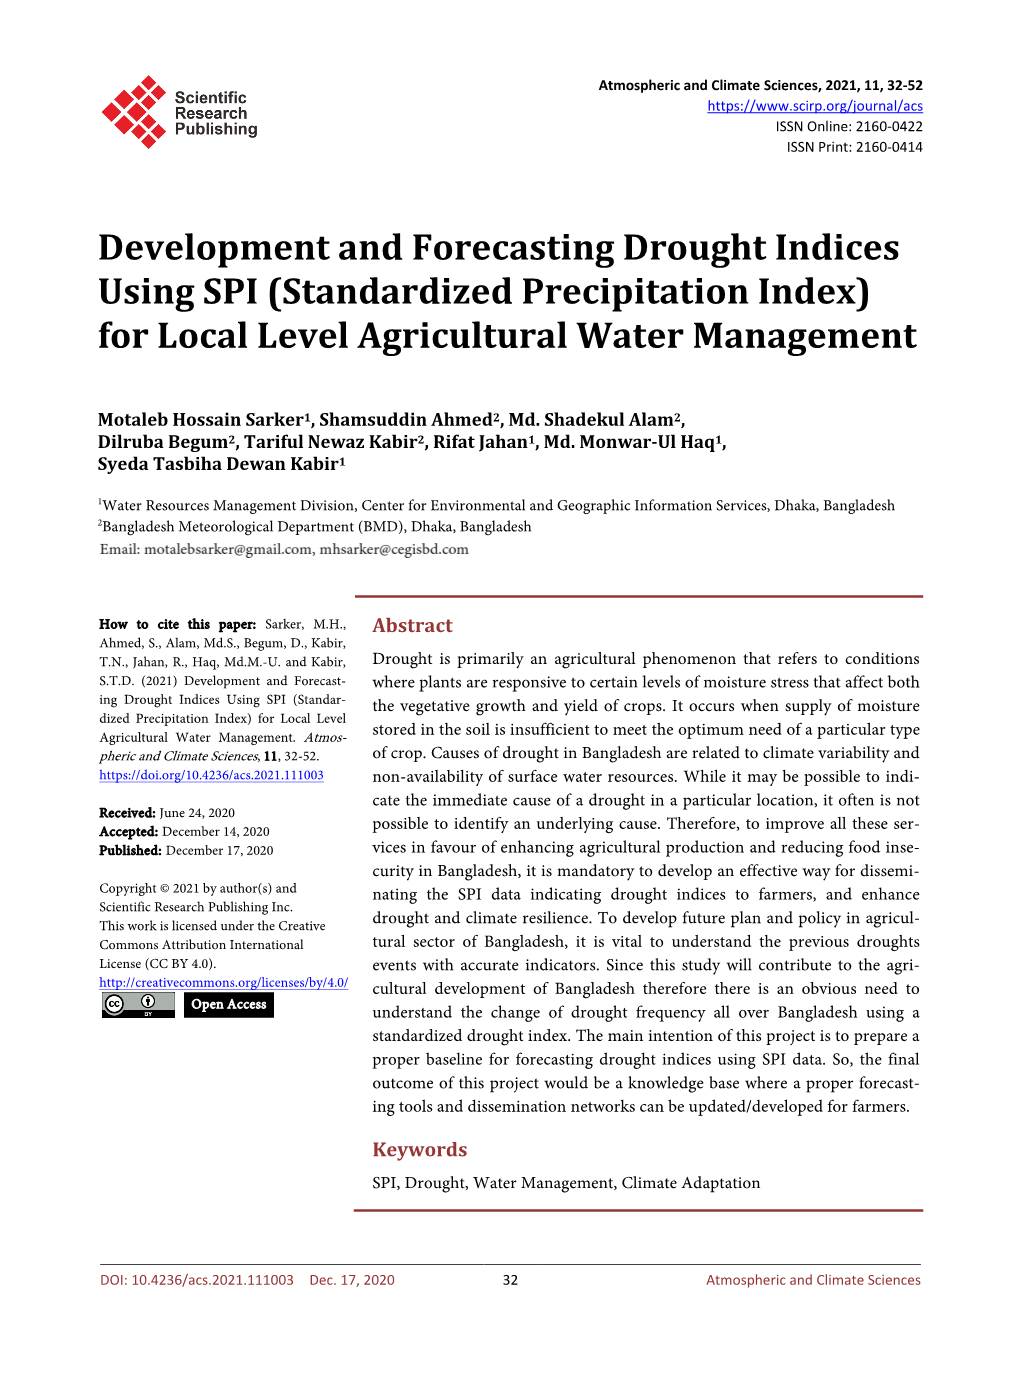 Development and Forecasting Drought Indices Using SPI (Standardized Precipitation Index) for Local Level Agricultural Water Management